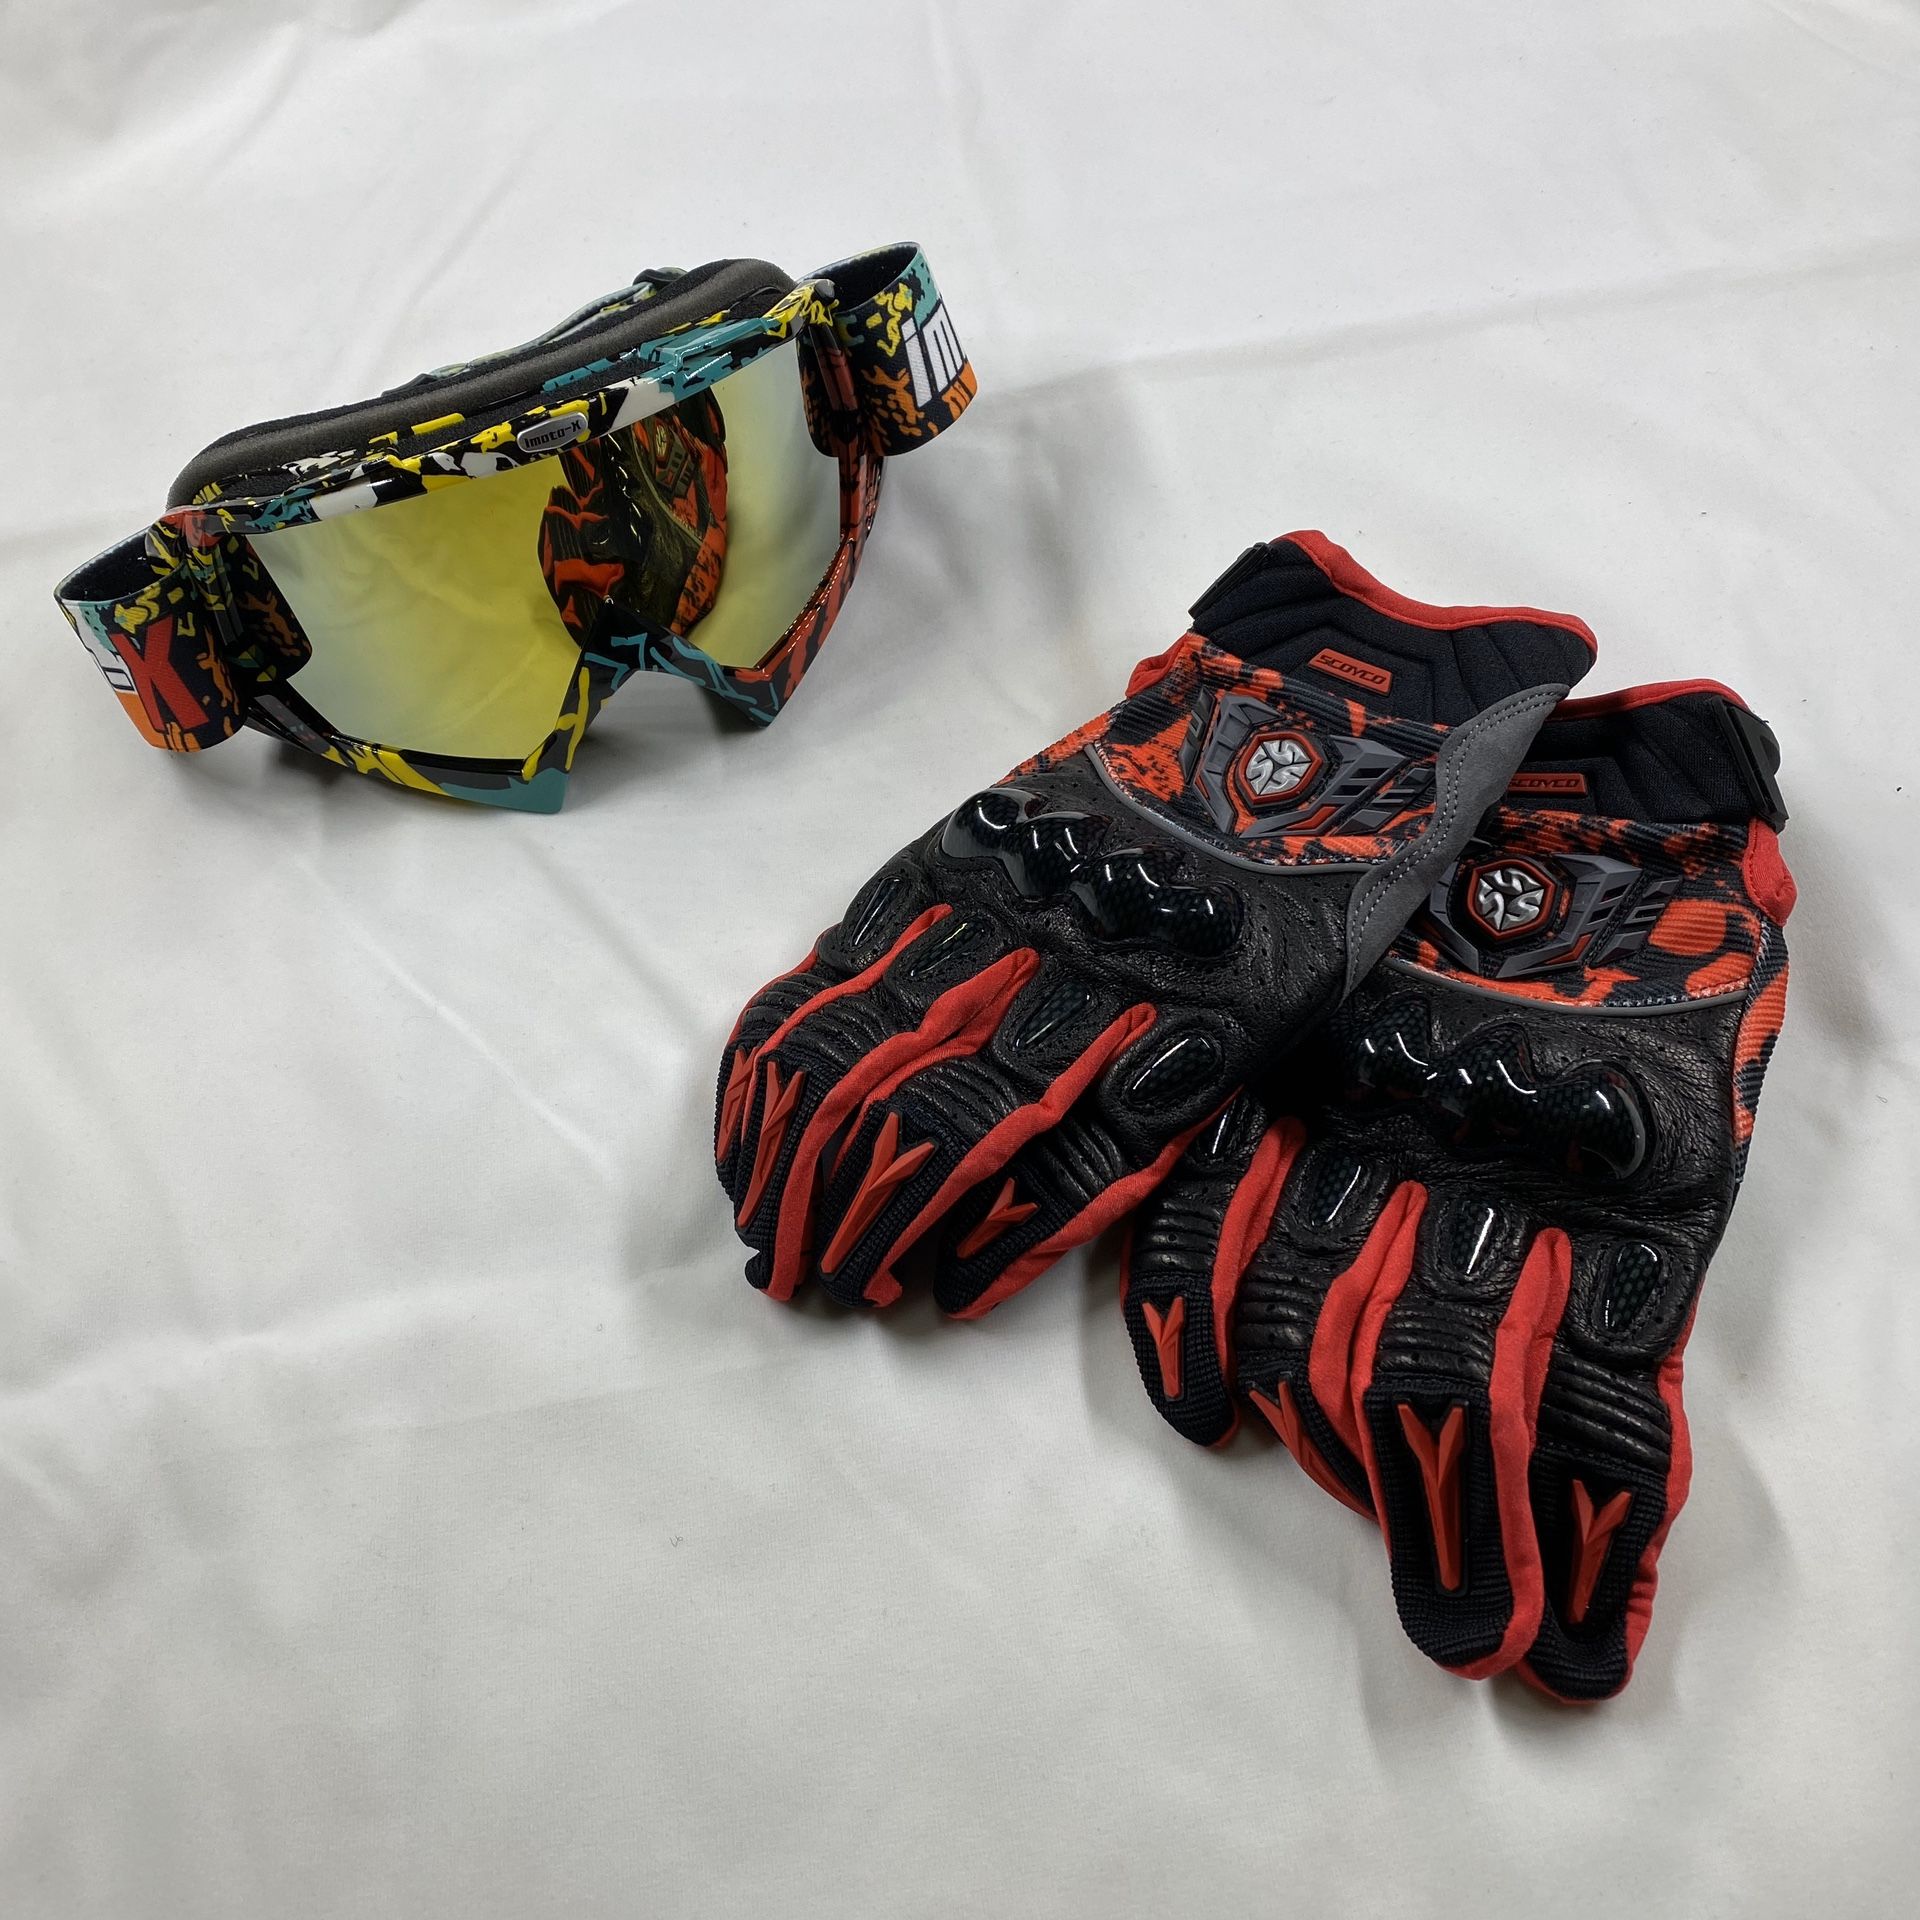 Dirt Bike Goggle and Gloves, for motocross motorcycle, size XXL